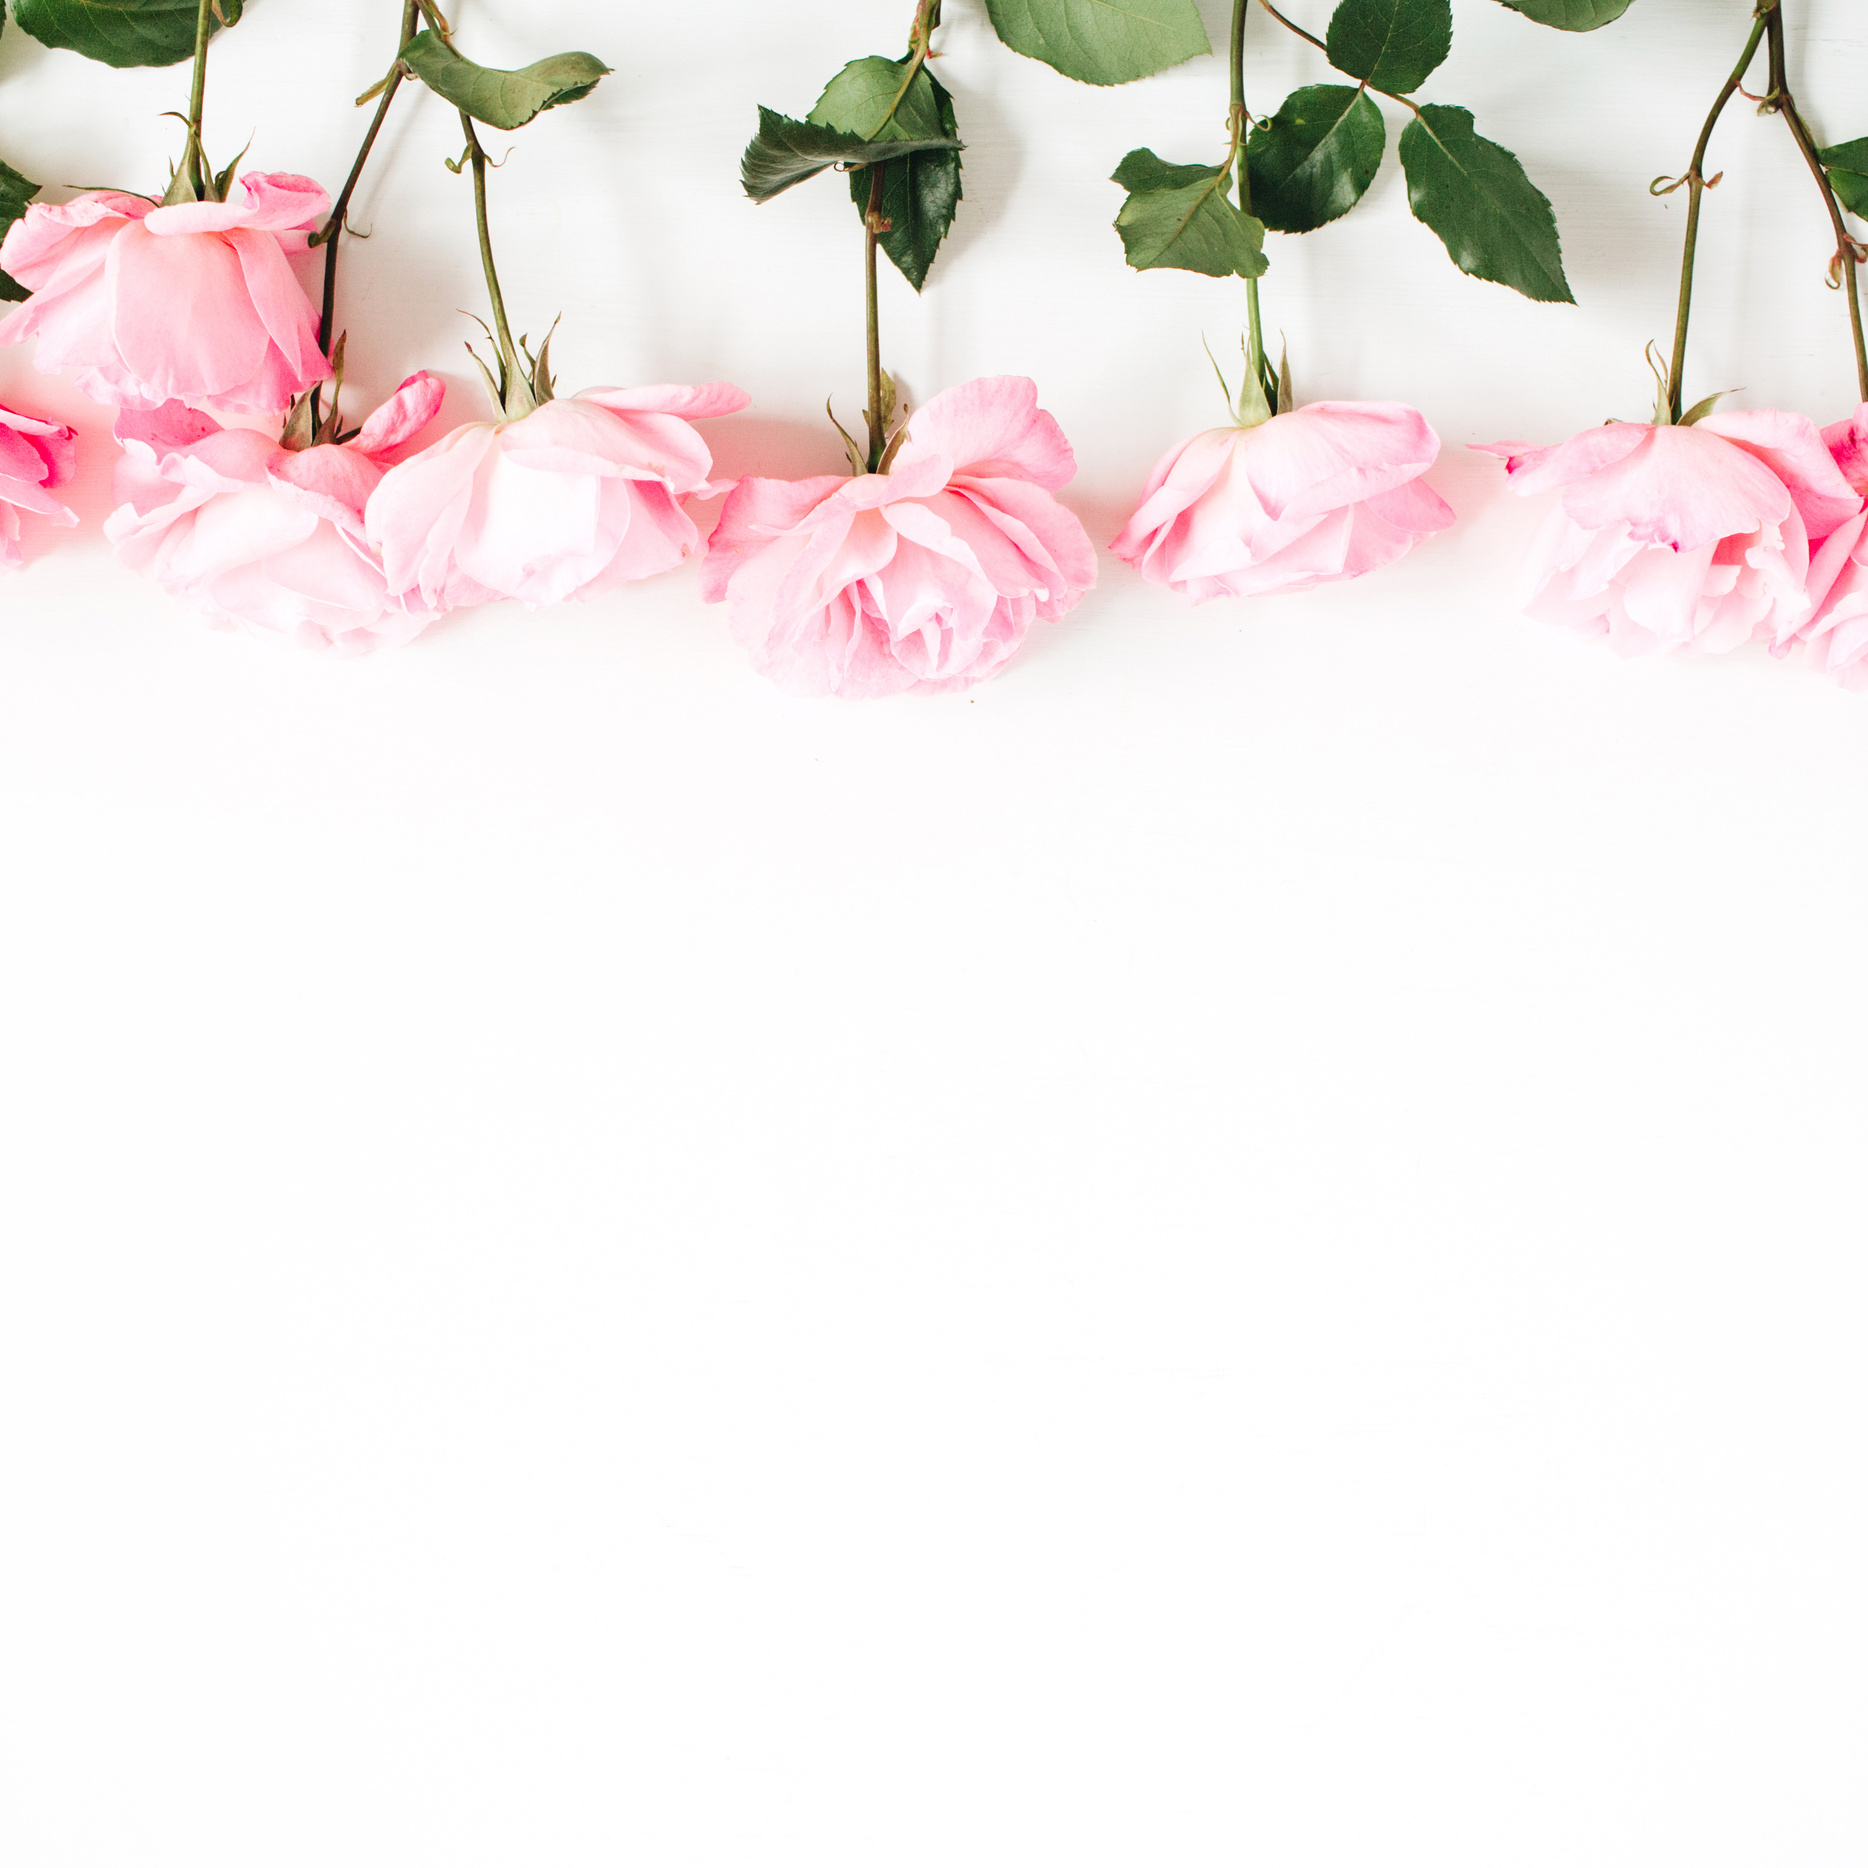 Pink Flowers on White Background